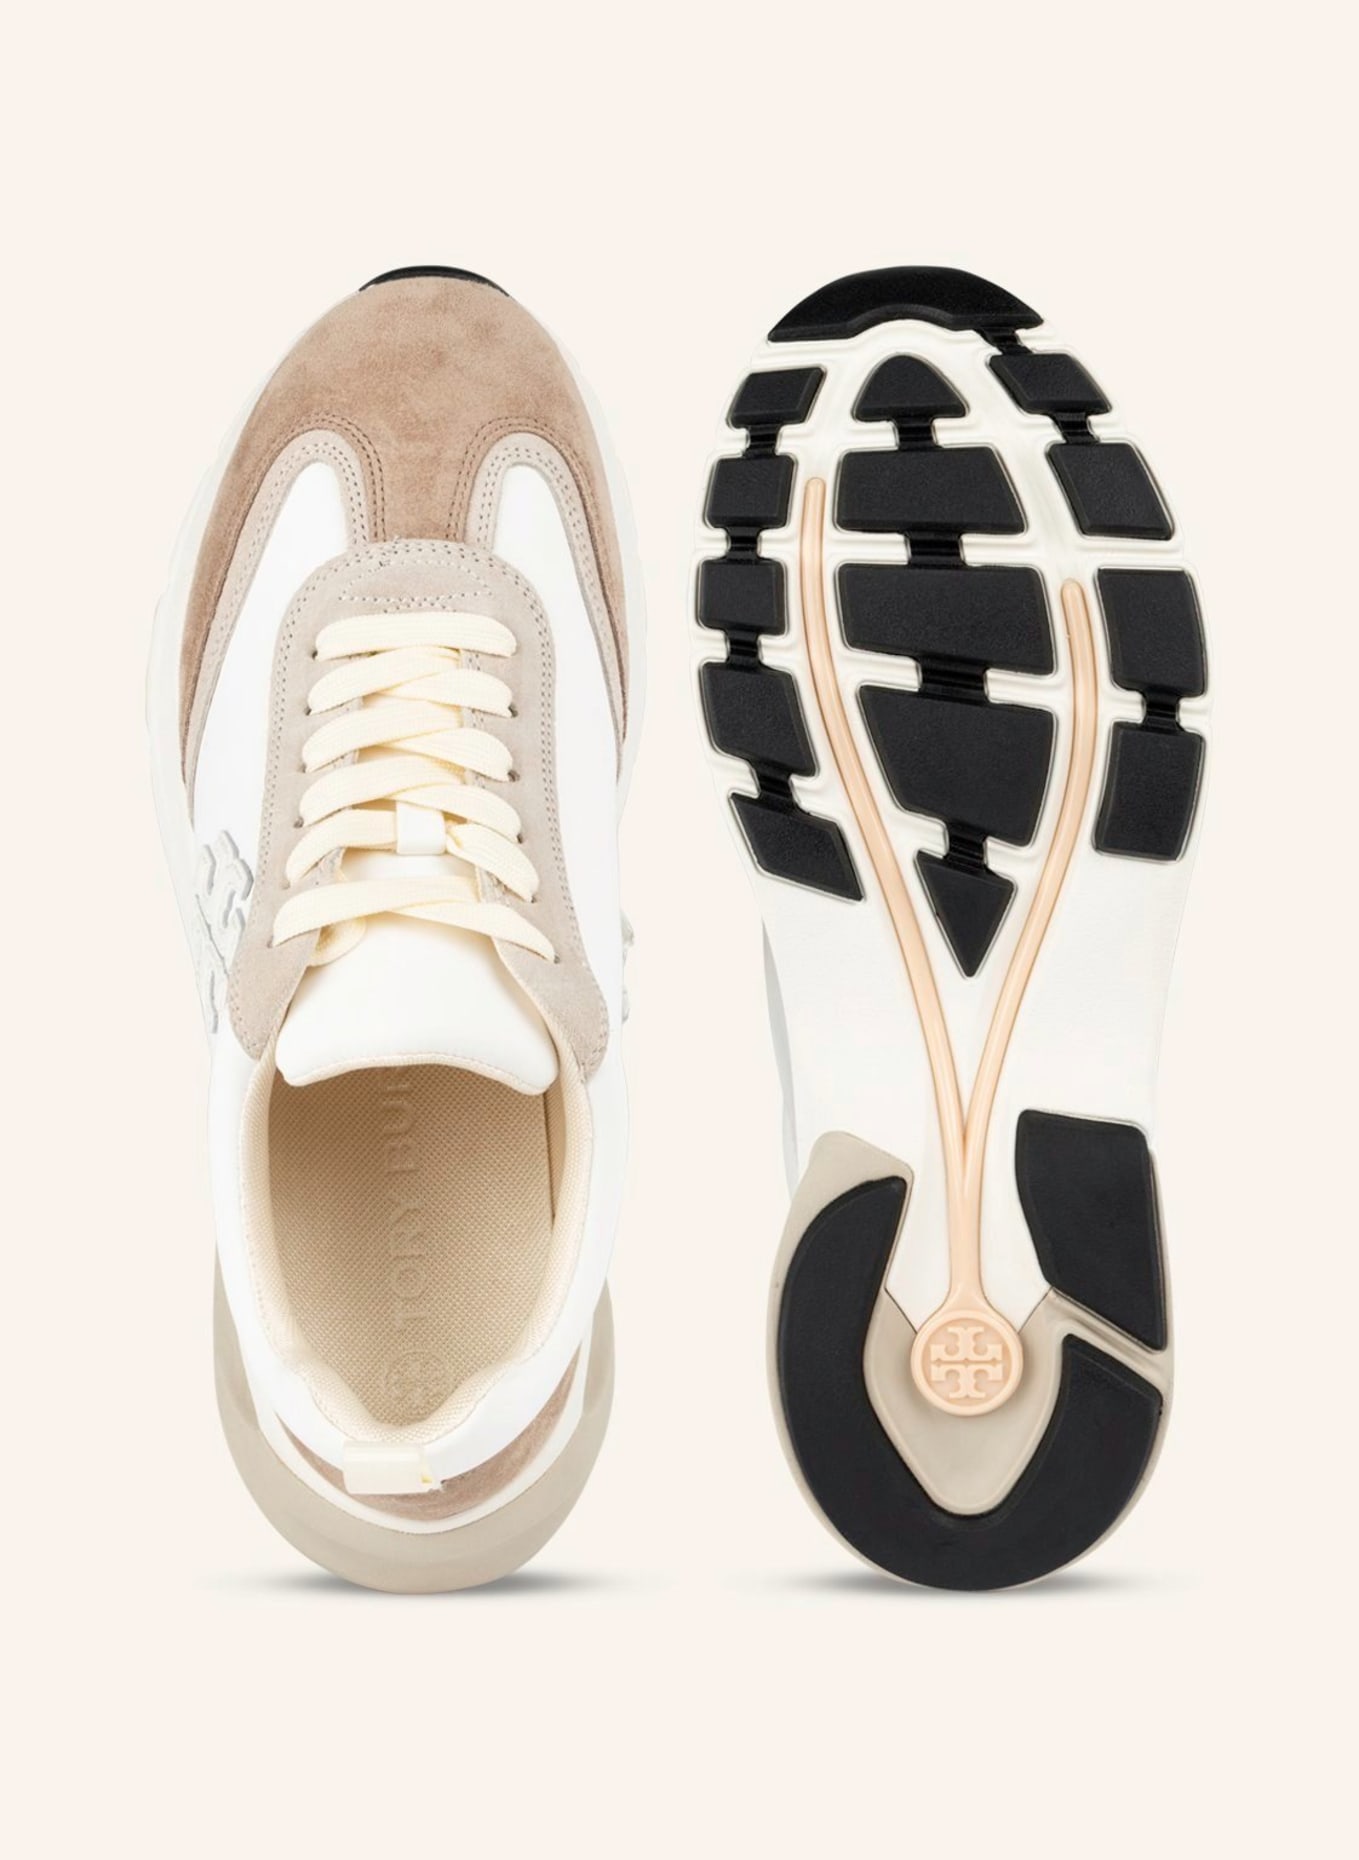 TORY BURCH Sneaker GOOD LUCK, Farbe: WEISS/ TAUPE/ CREME (Bild 5)